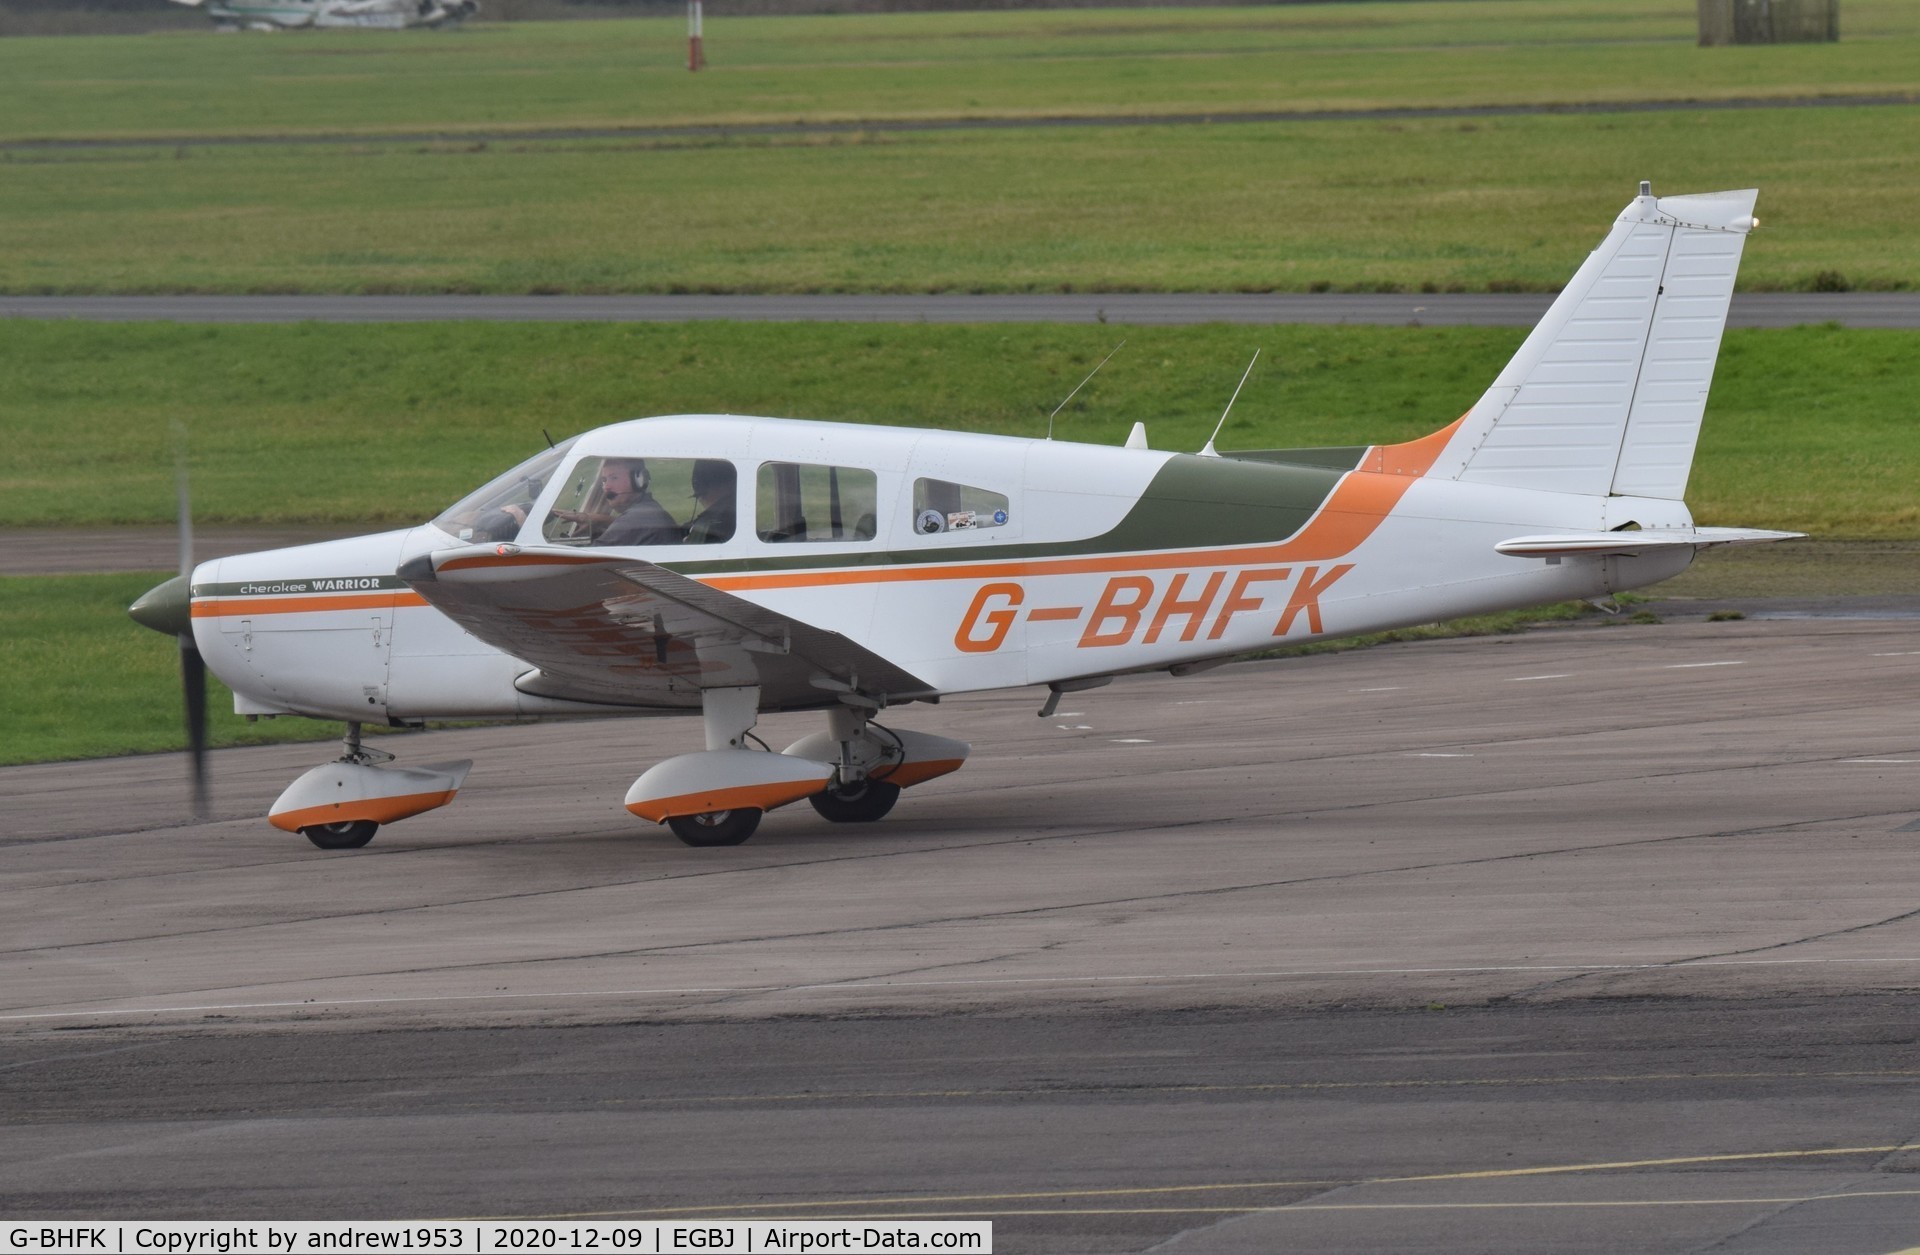 G-BHFK, 1976 Piper PA-28-151 Cherokee Warrior C/N 28-7615088, G-BHFK at Gloucestershire Airport.